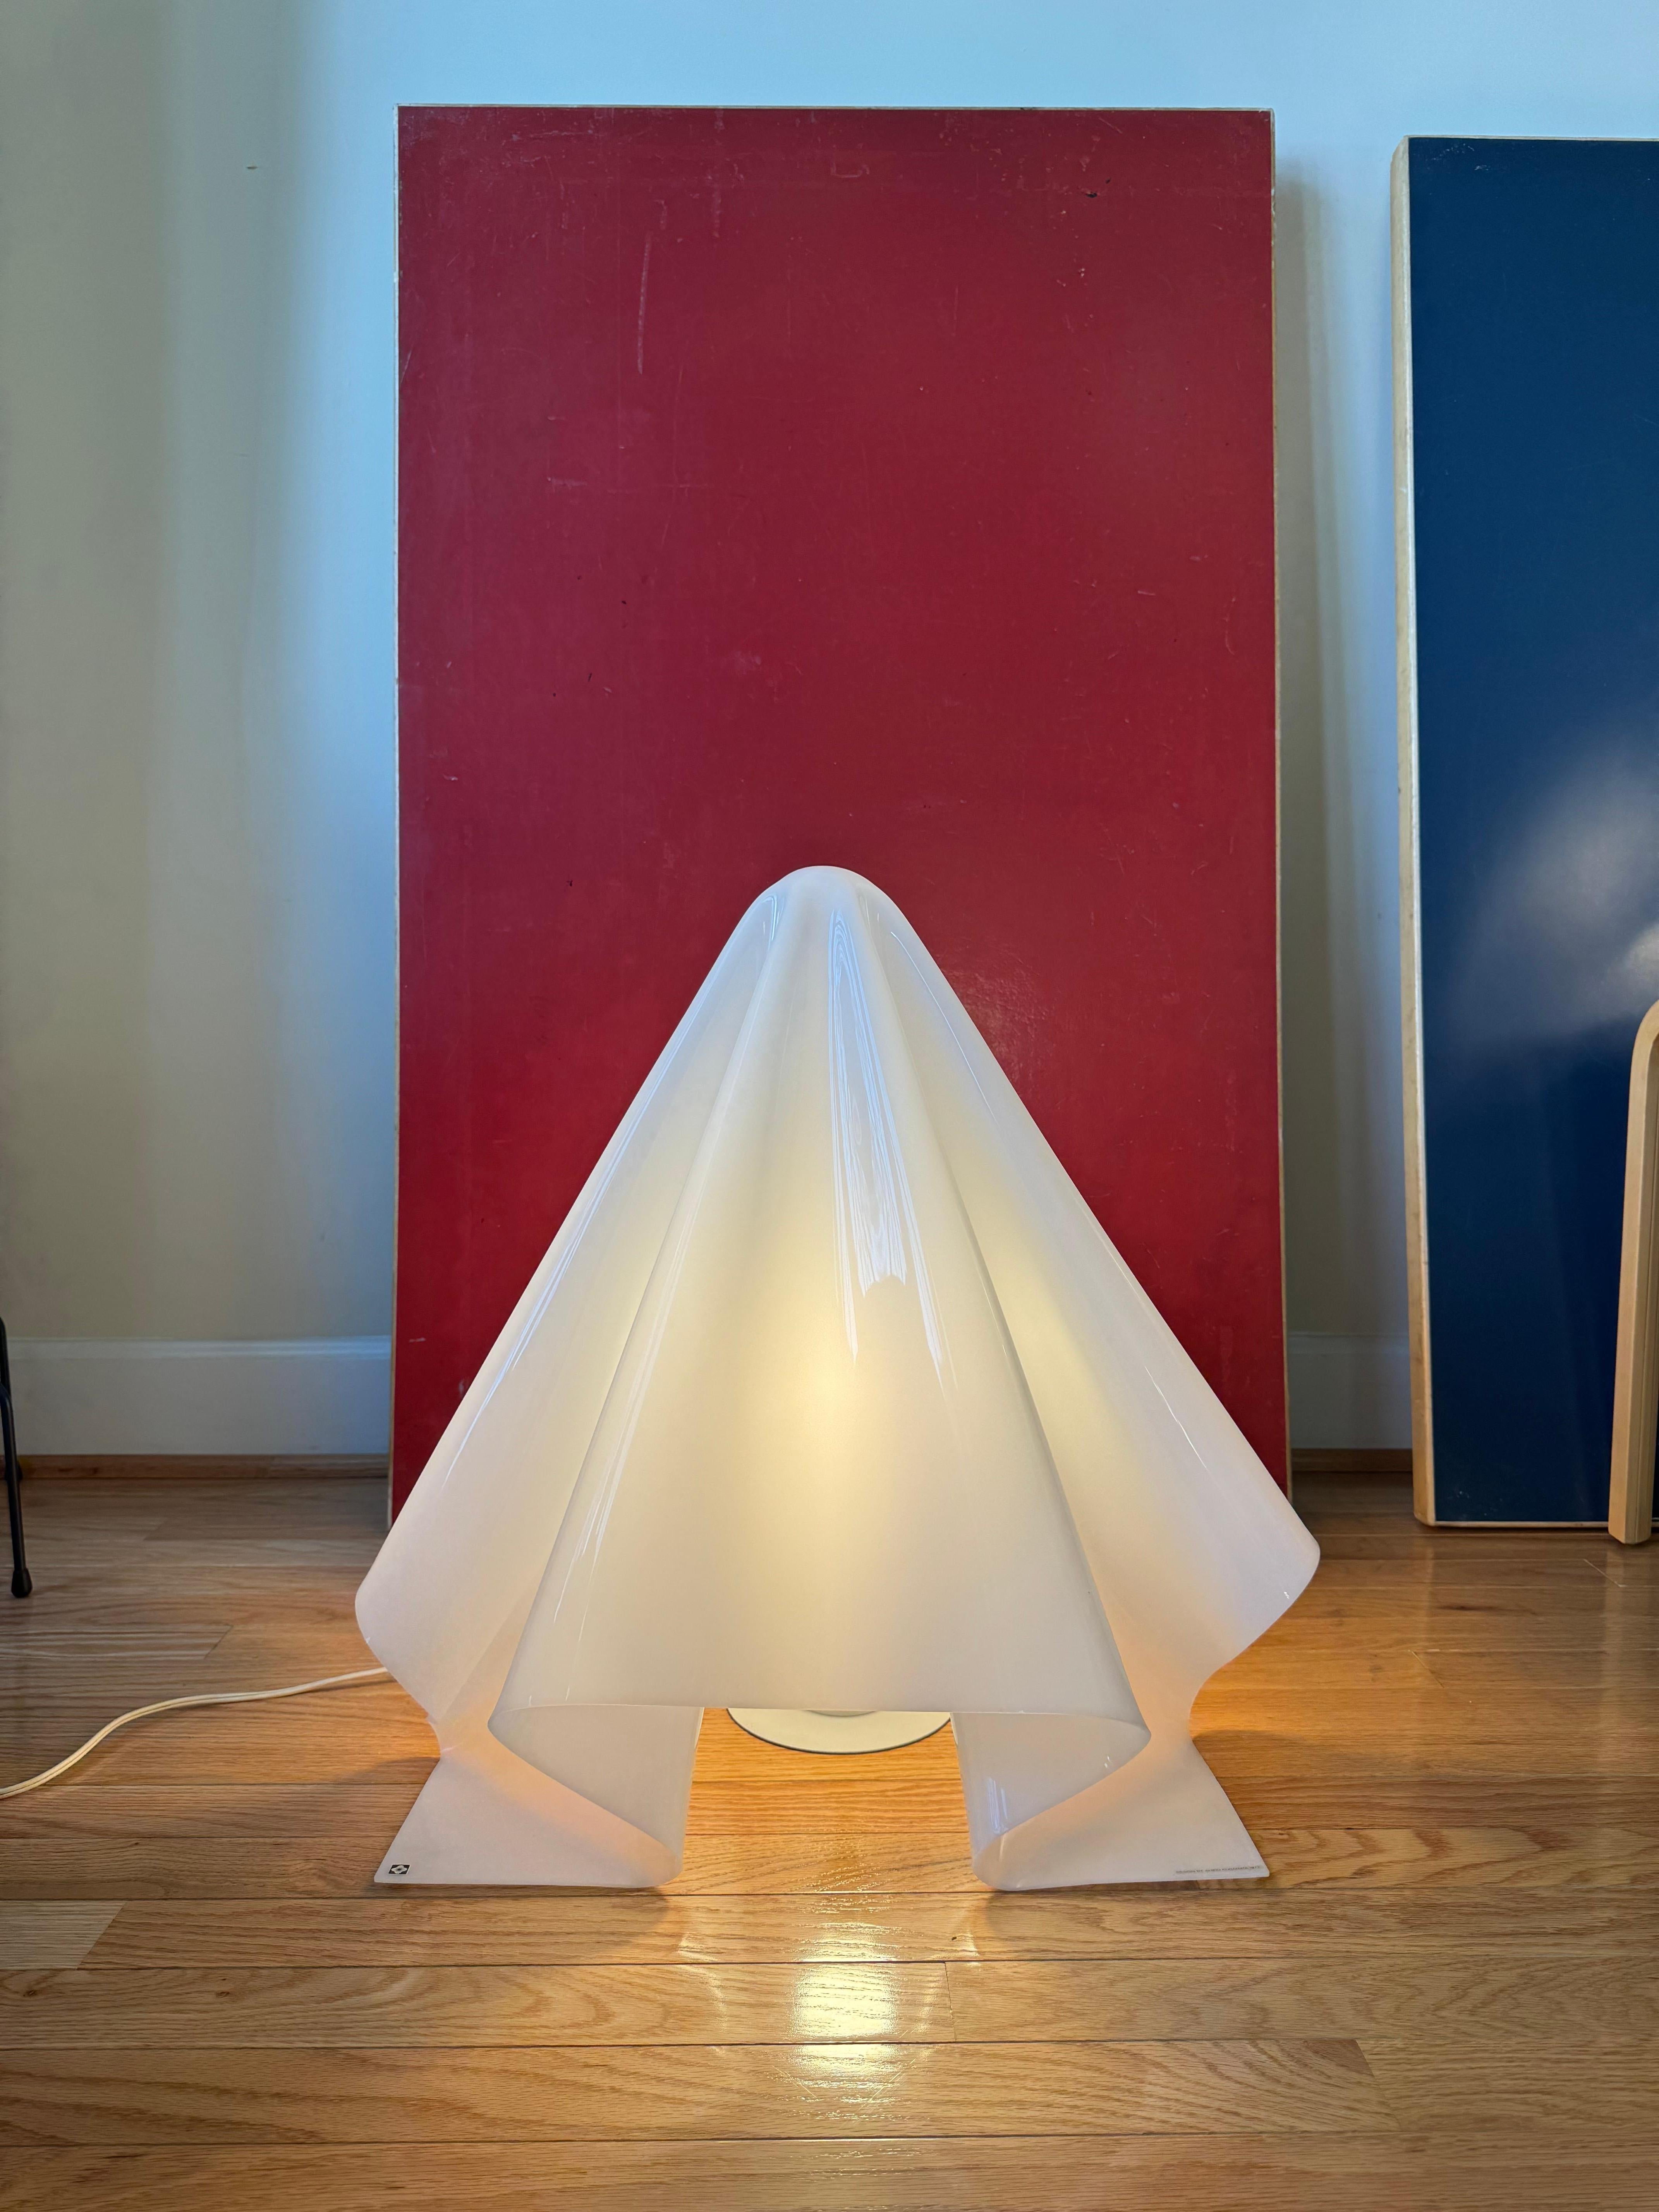 This masterpiece, K-series or another name Oba- Q, epitomizes Japanese post-modernism designed in 1972 by Shiro Kuramata, the Japanese legendary interior designer.

Another name Oba Q was given because the shade shapes like a lovingly popular ghost